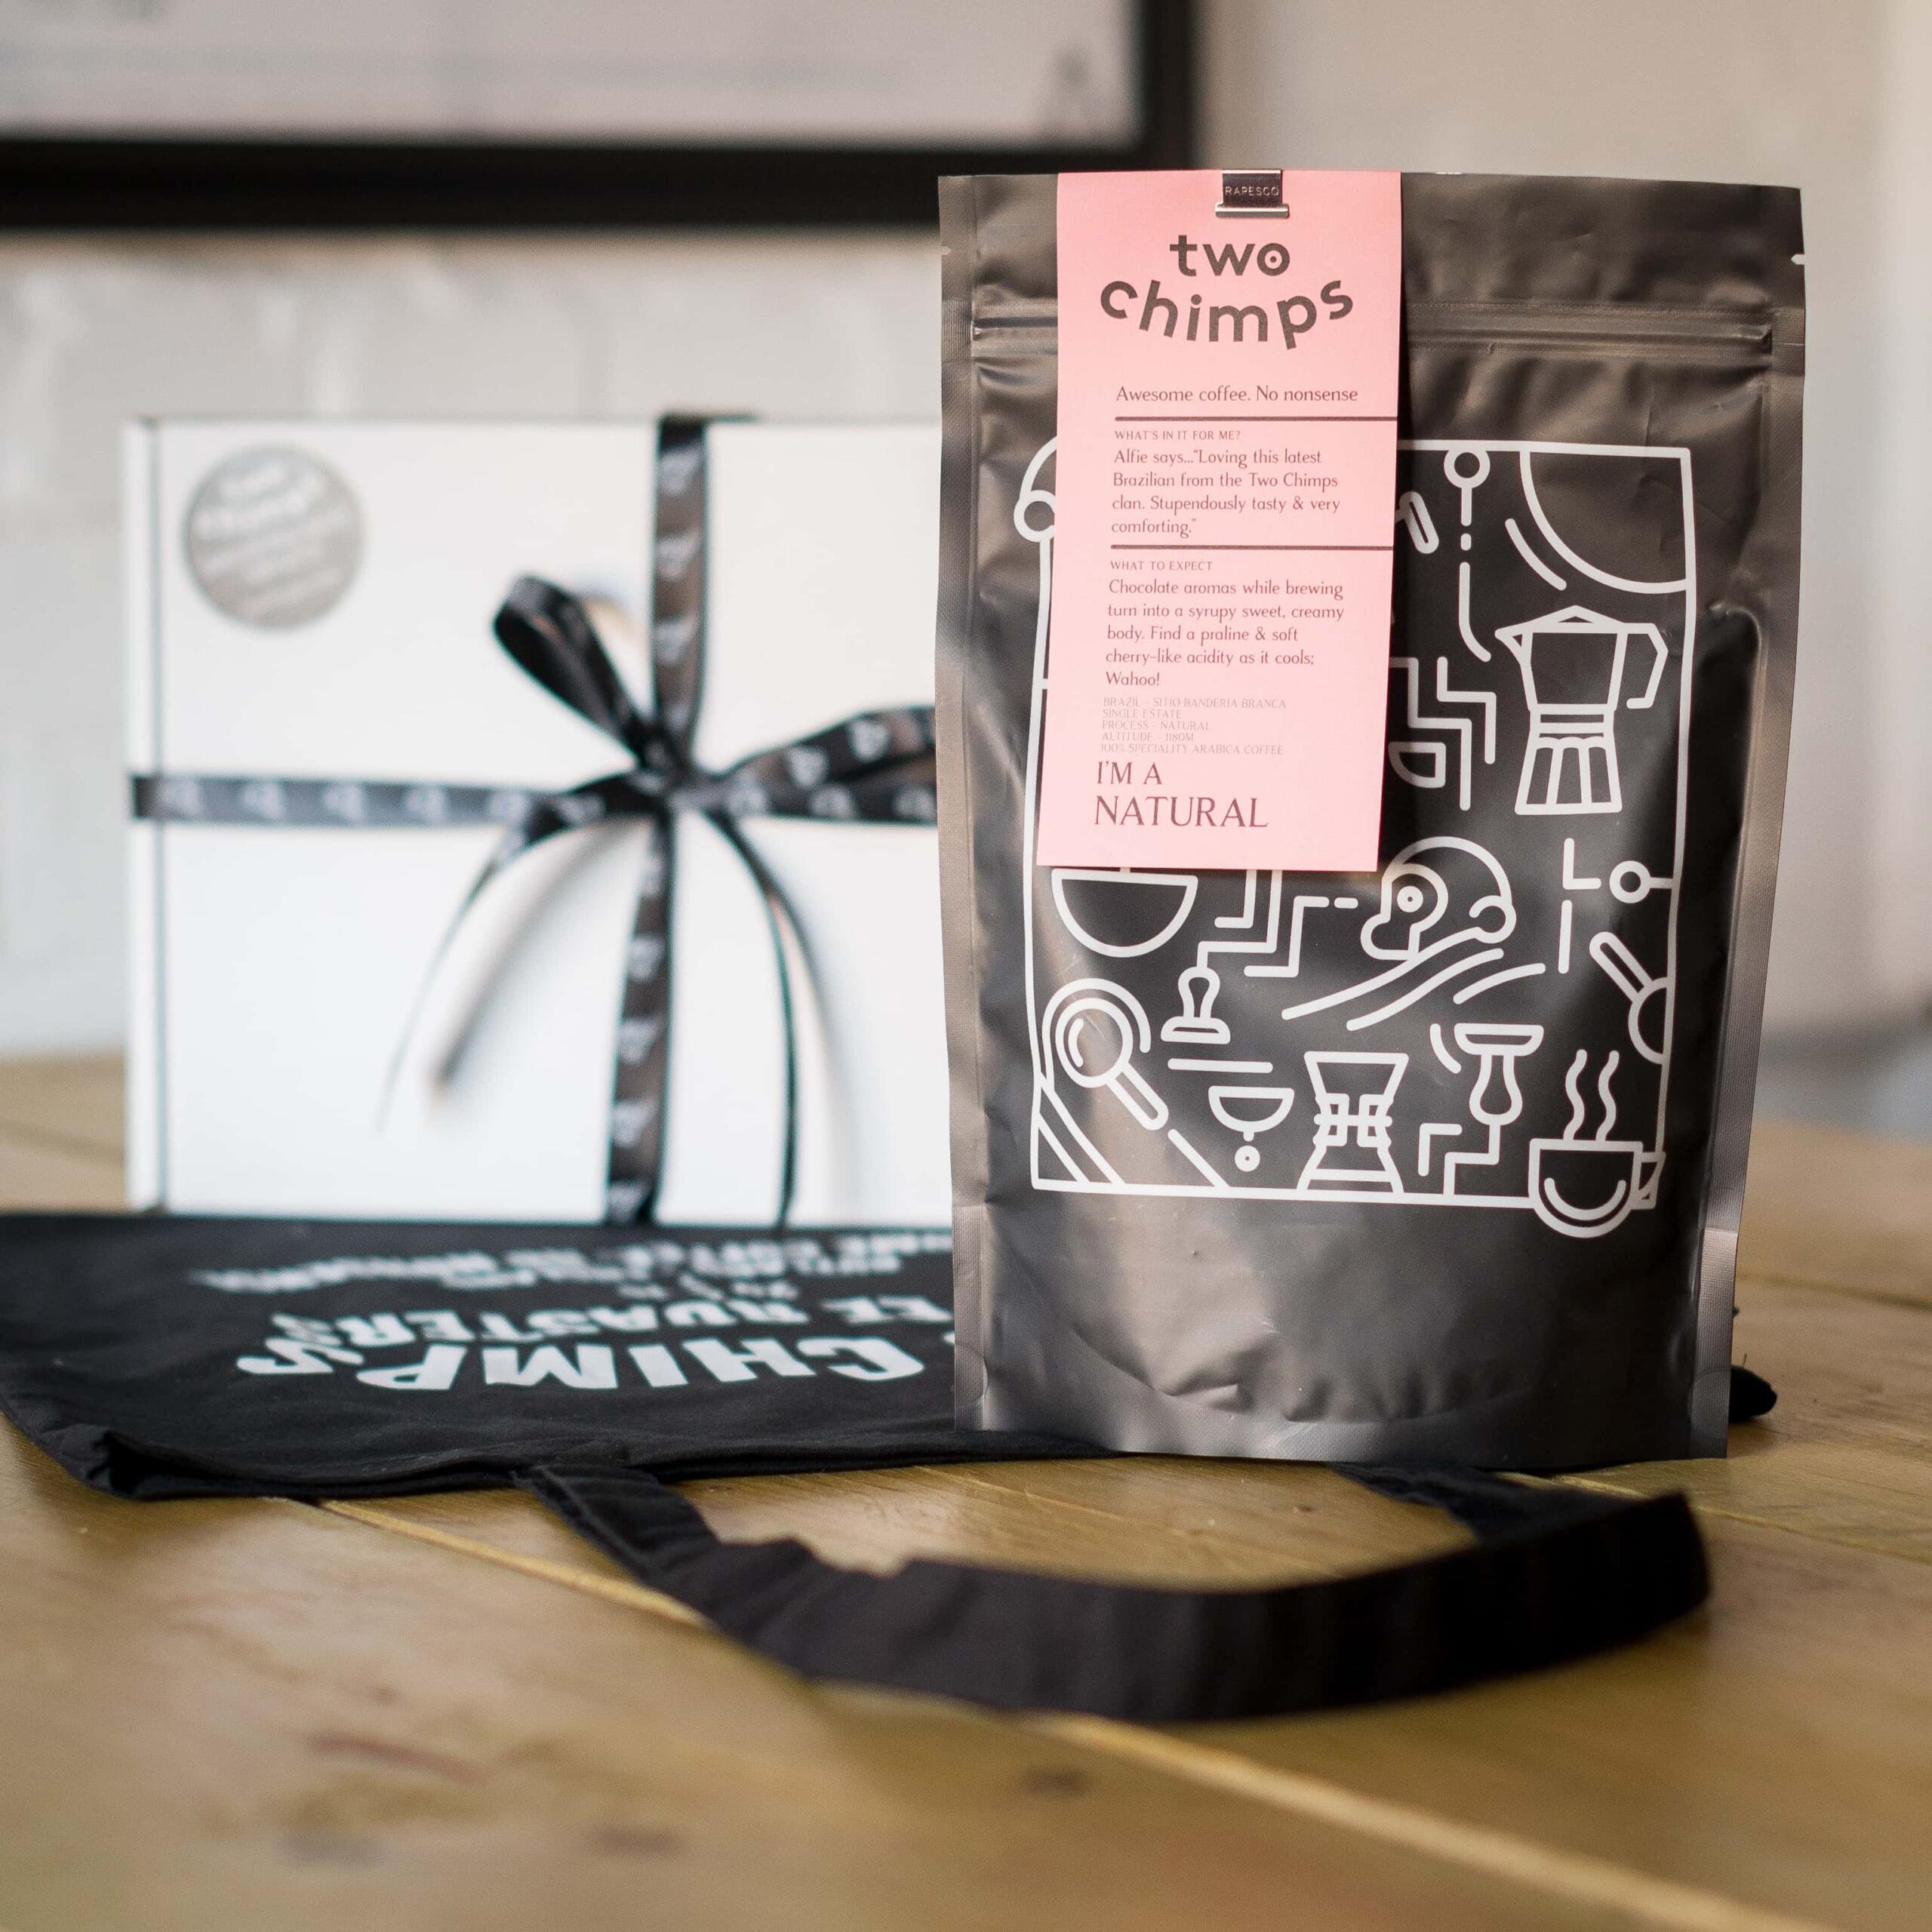 coffee and tote bag gift set with box from two chimps coffee